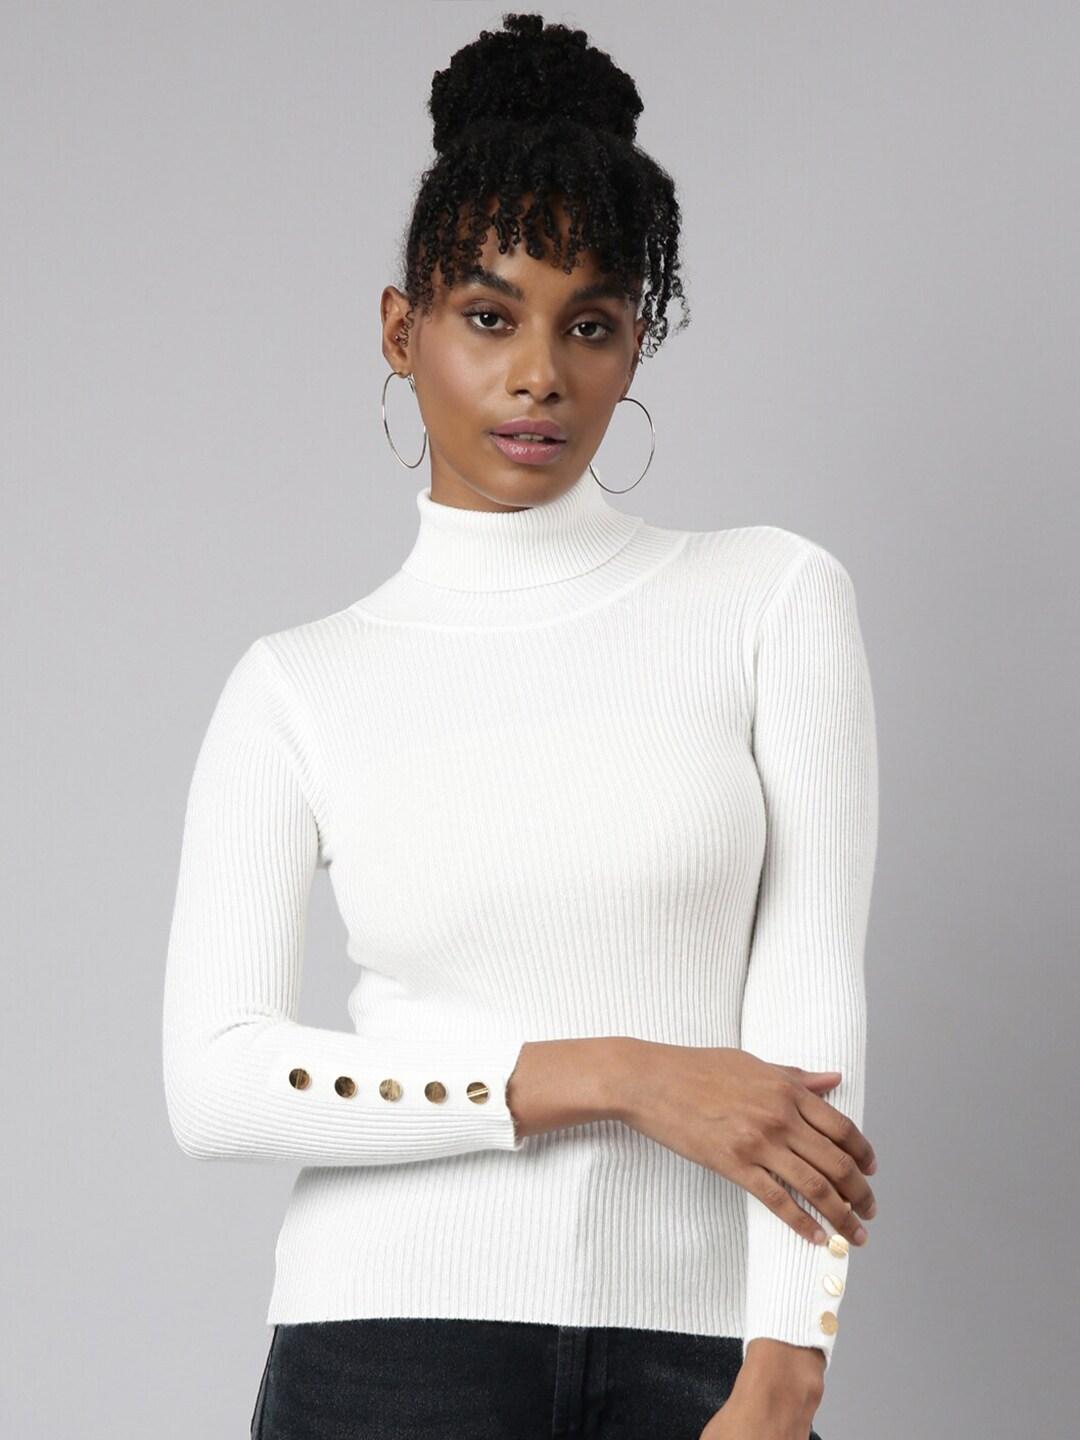 showoff-high-neck-long-sleeves-monochrome-top